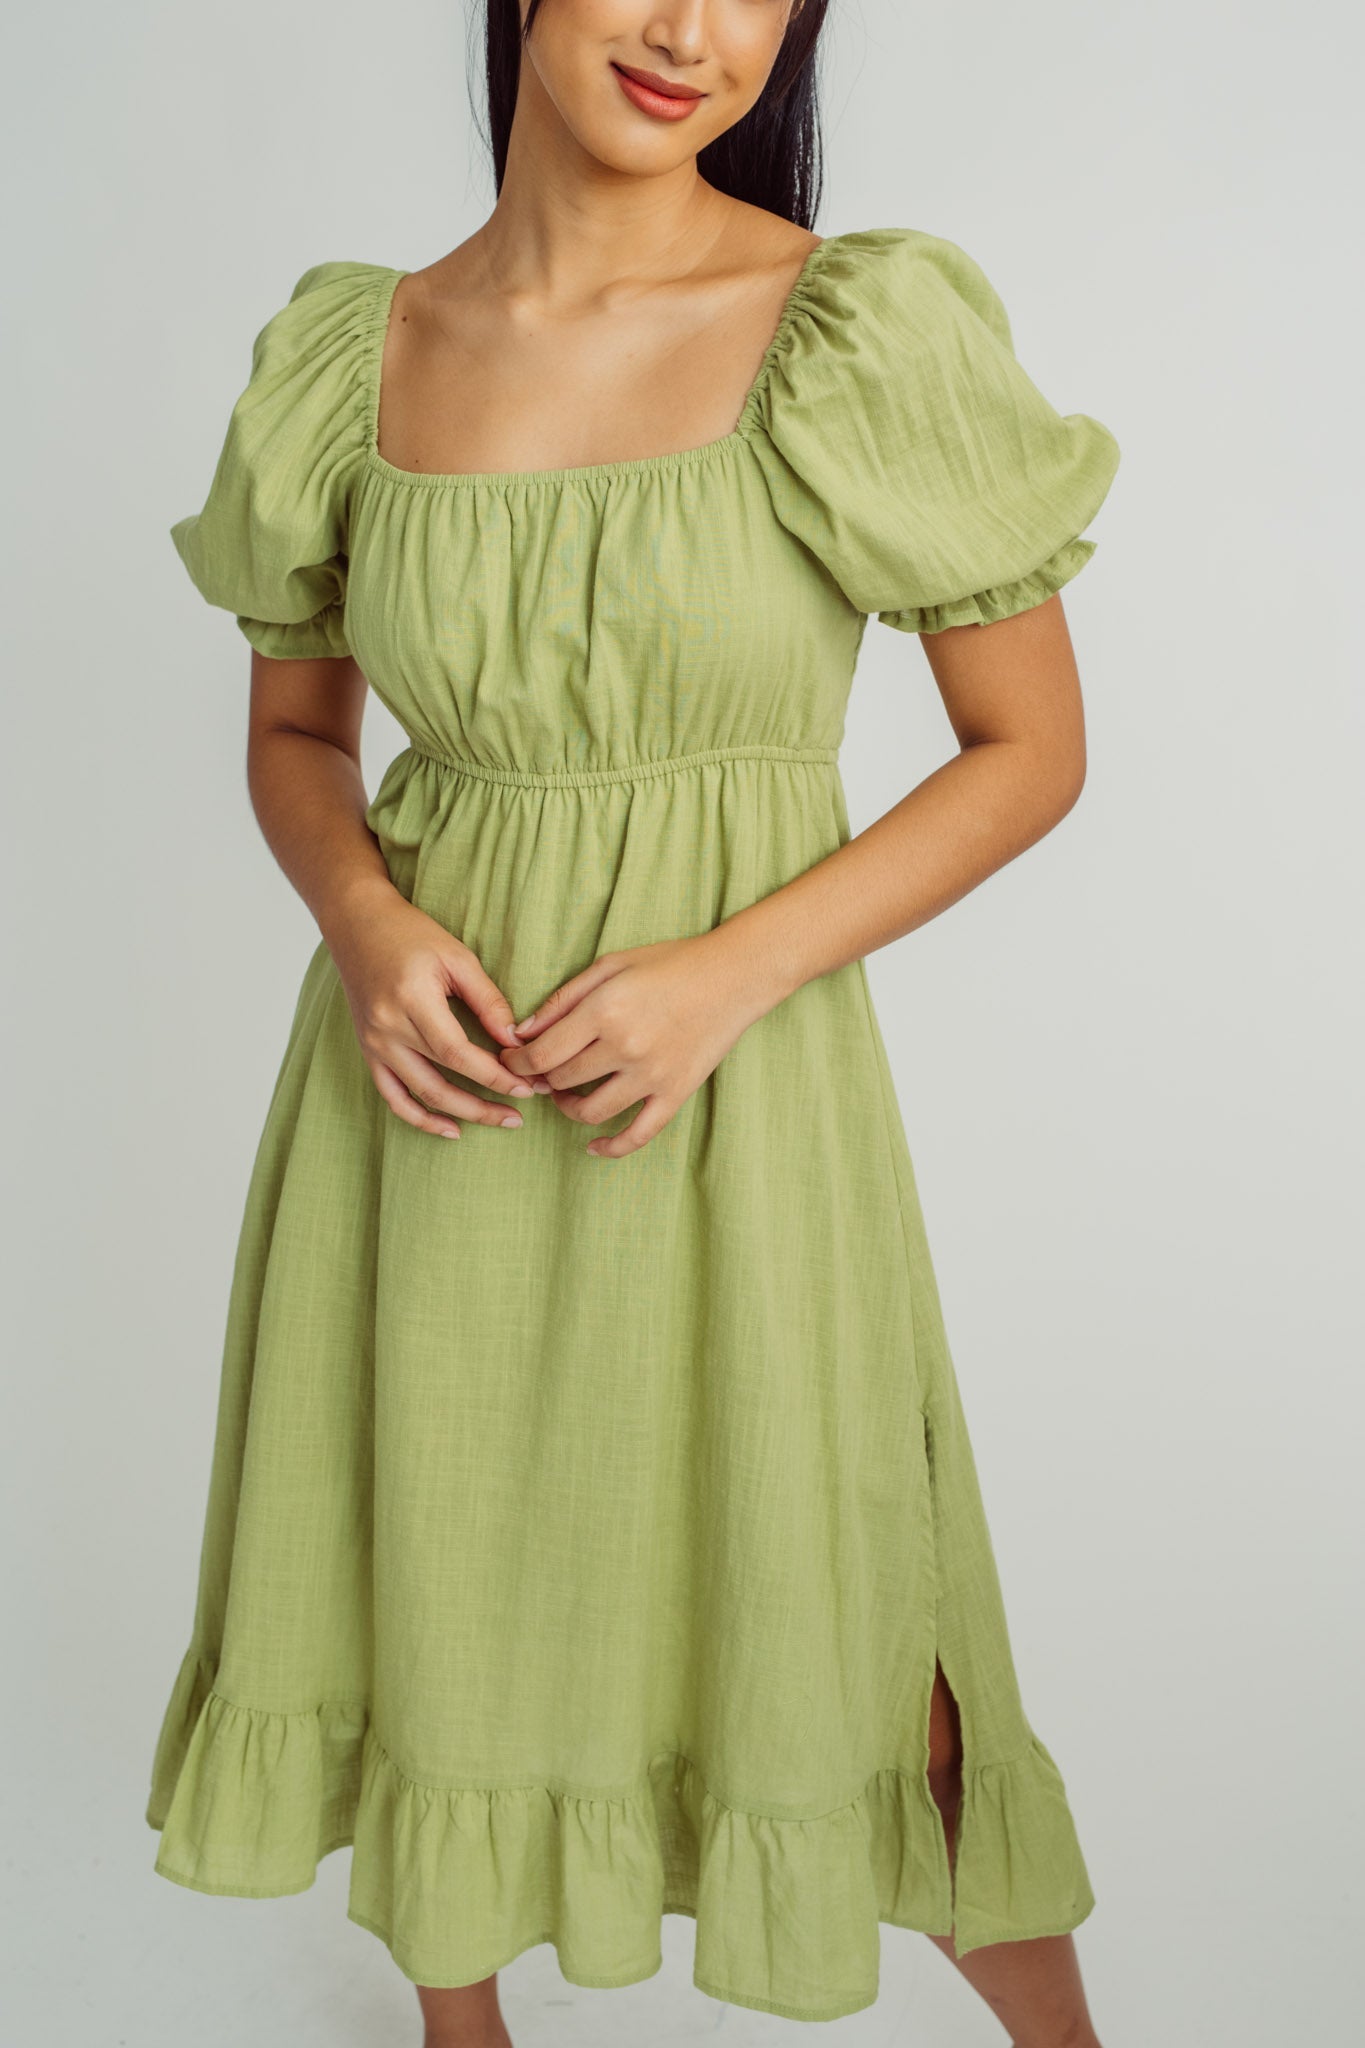 Green Fashion Garthered with Puffs Sleeves Dress - Mossimo PH